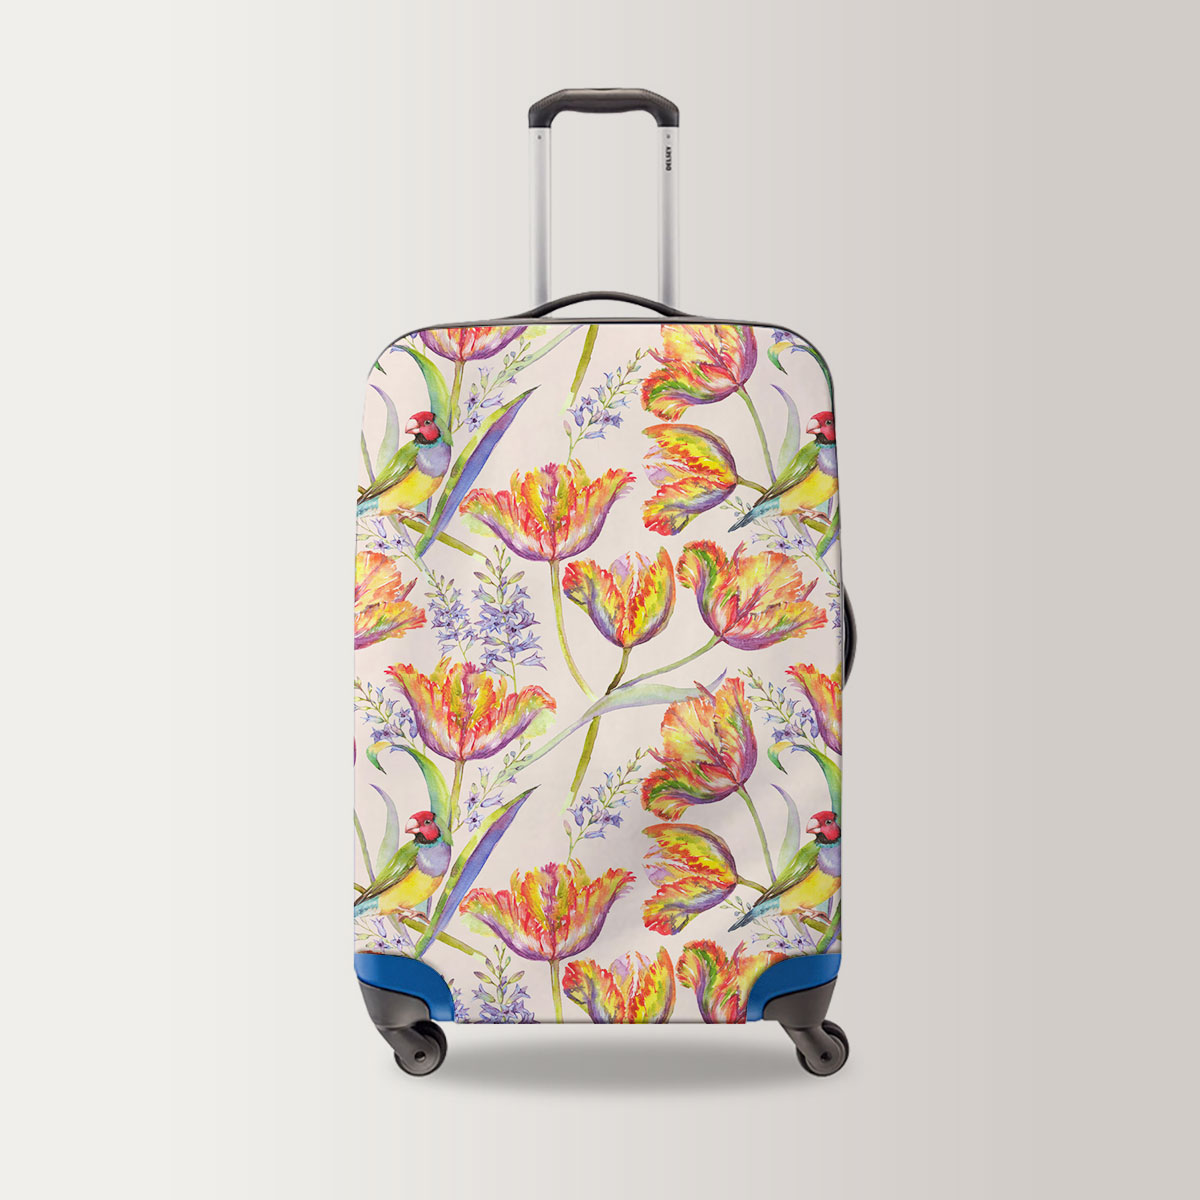 Tulips Floral Gouldian Finch Luggage Bag